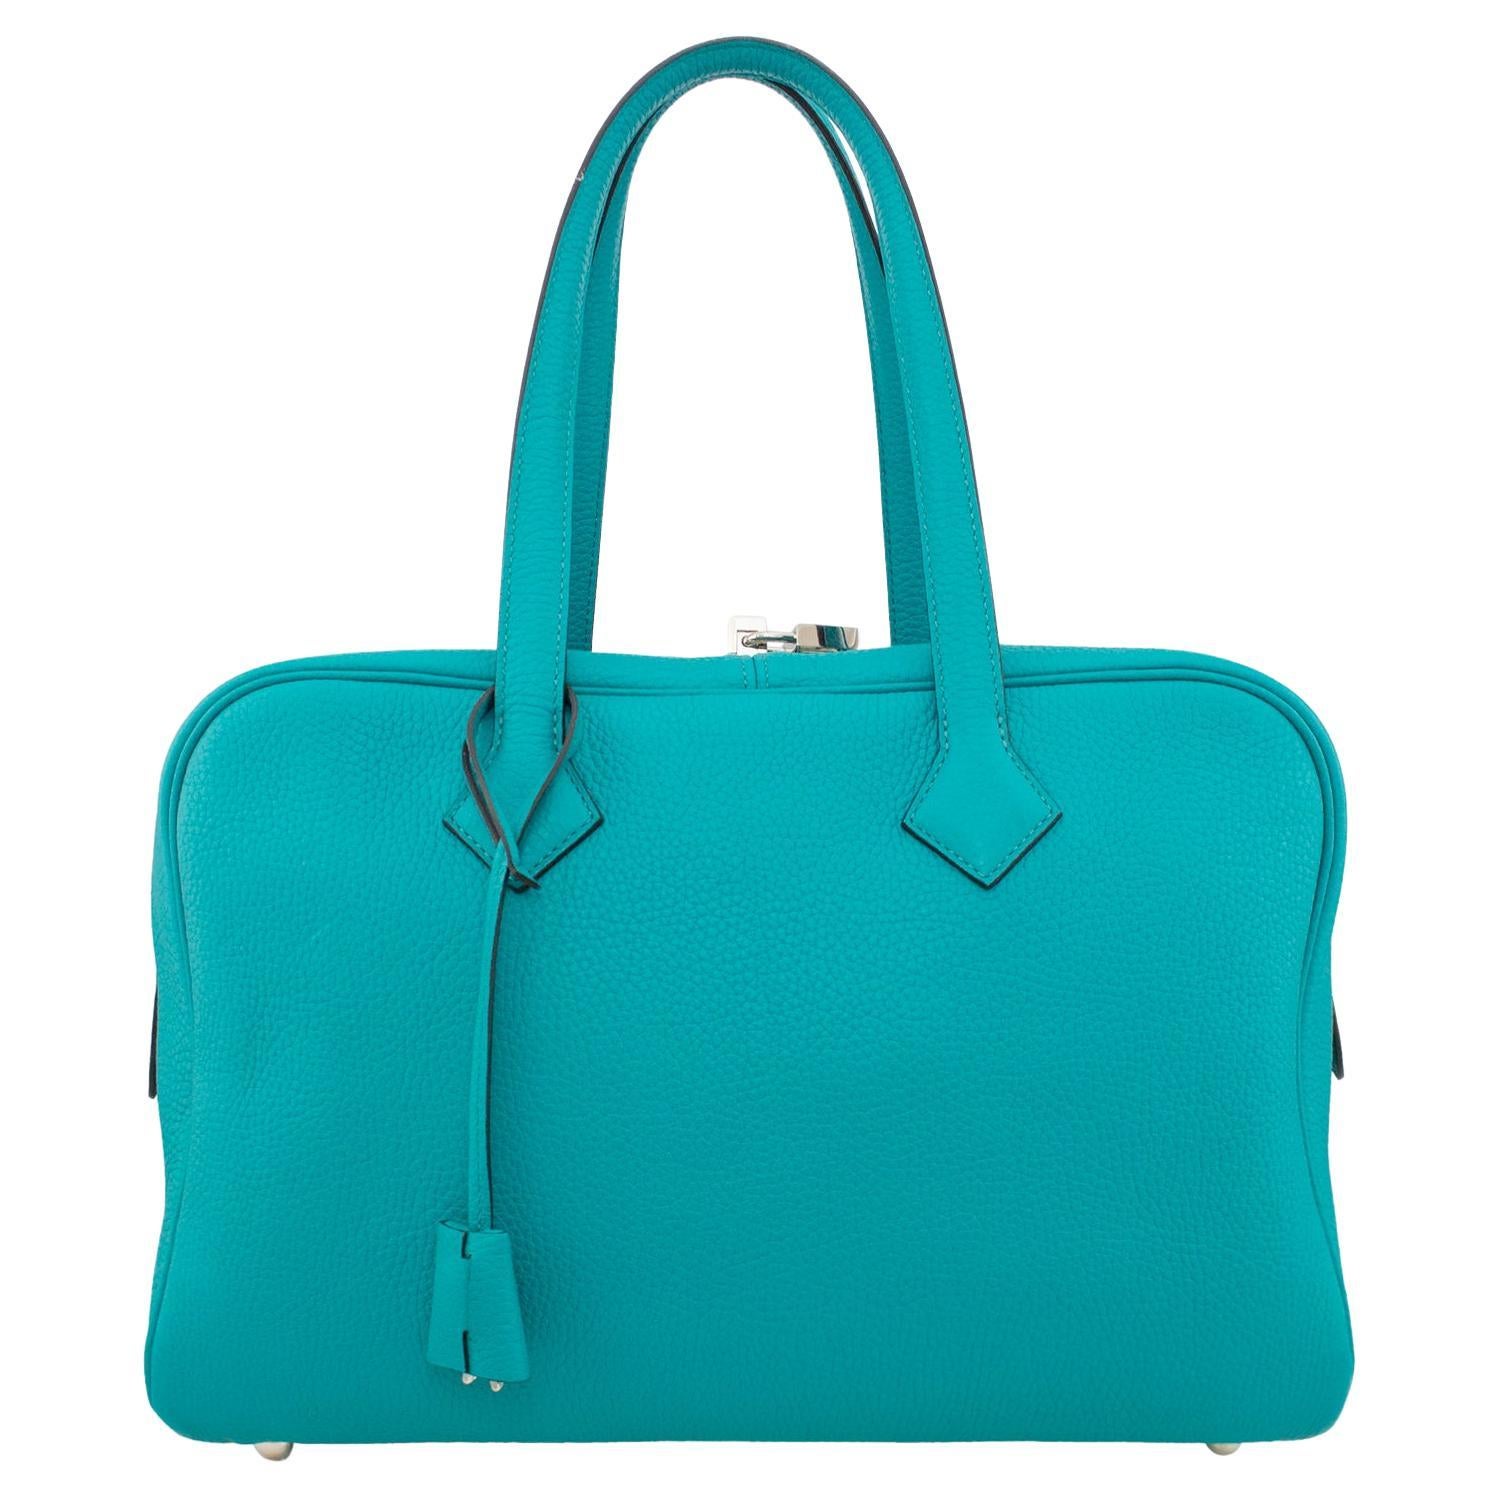  Hermes Taurillon Clemence Novillo Victoria II 35 in Turquoise  For Sale